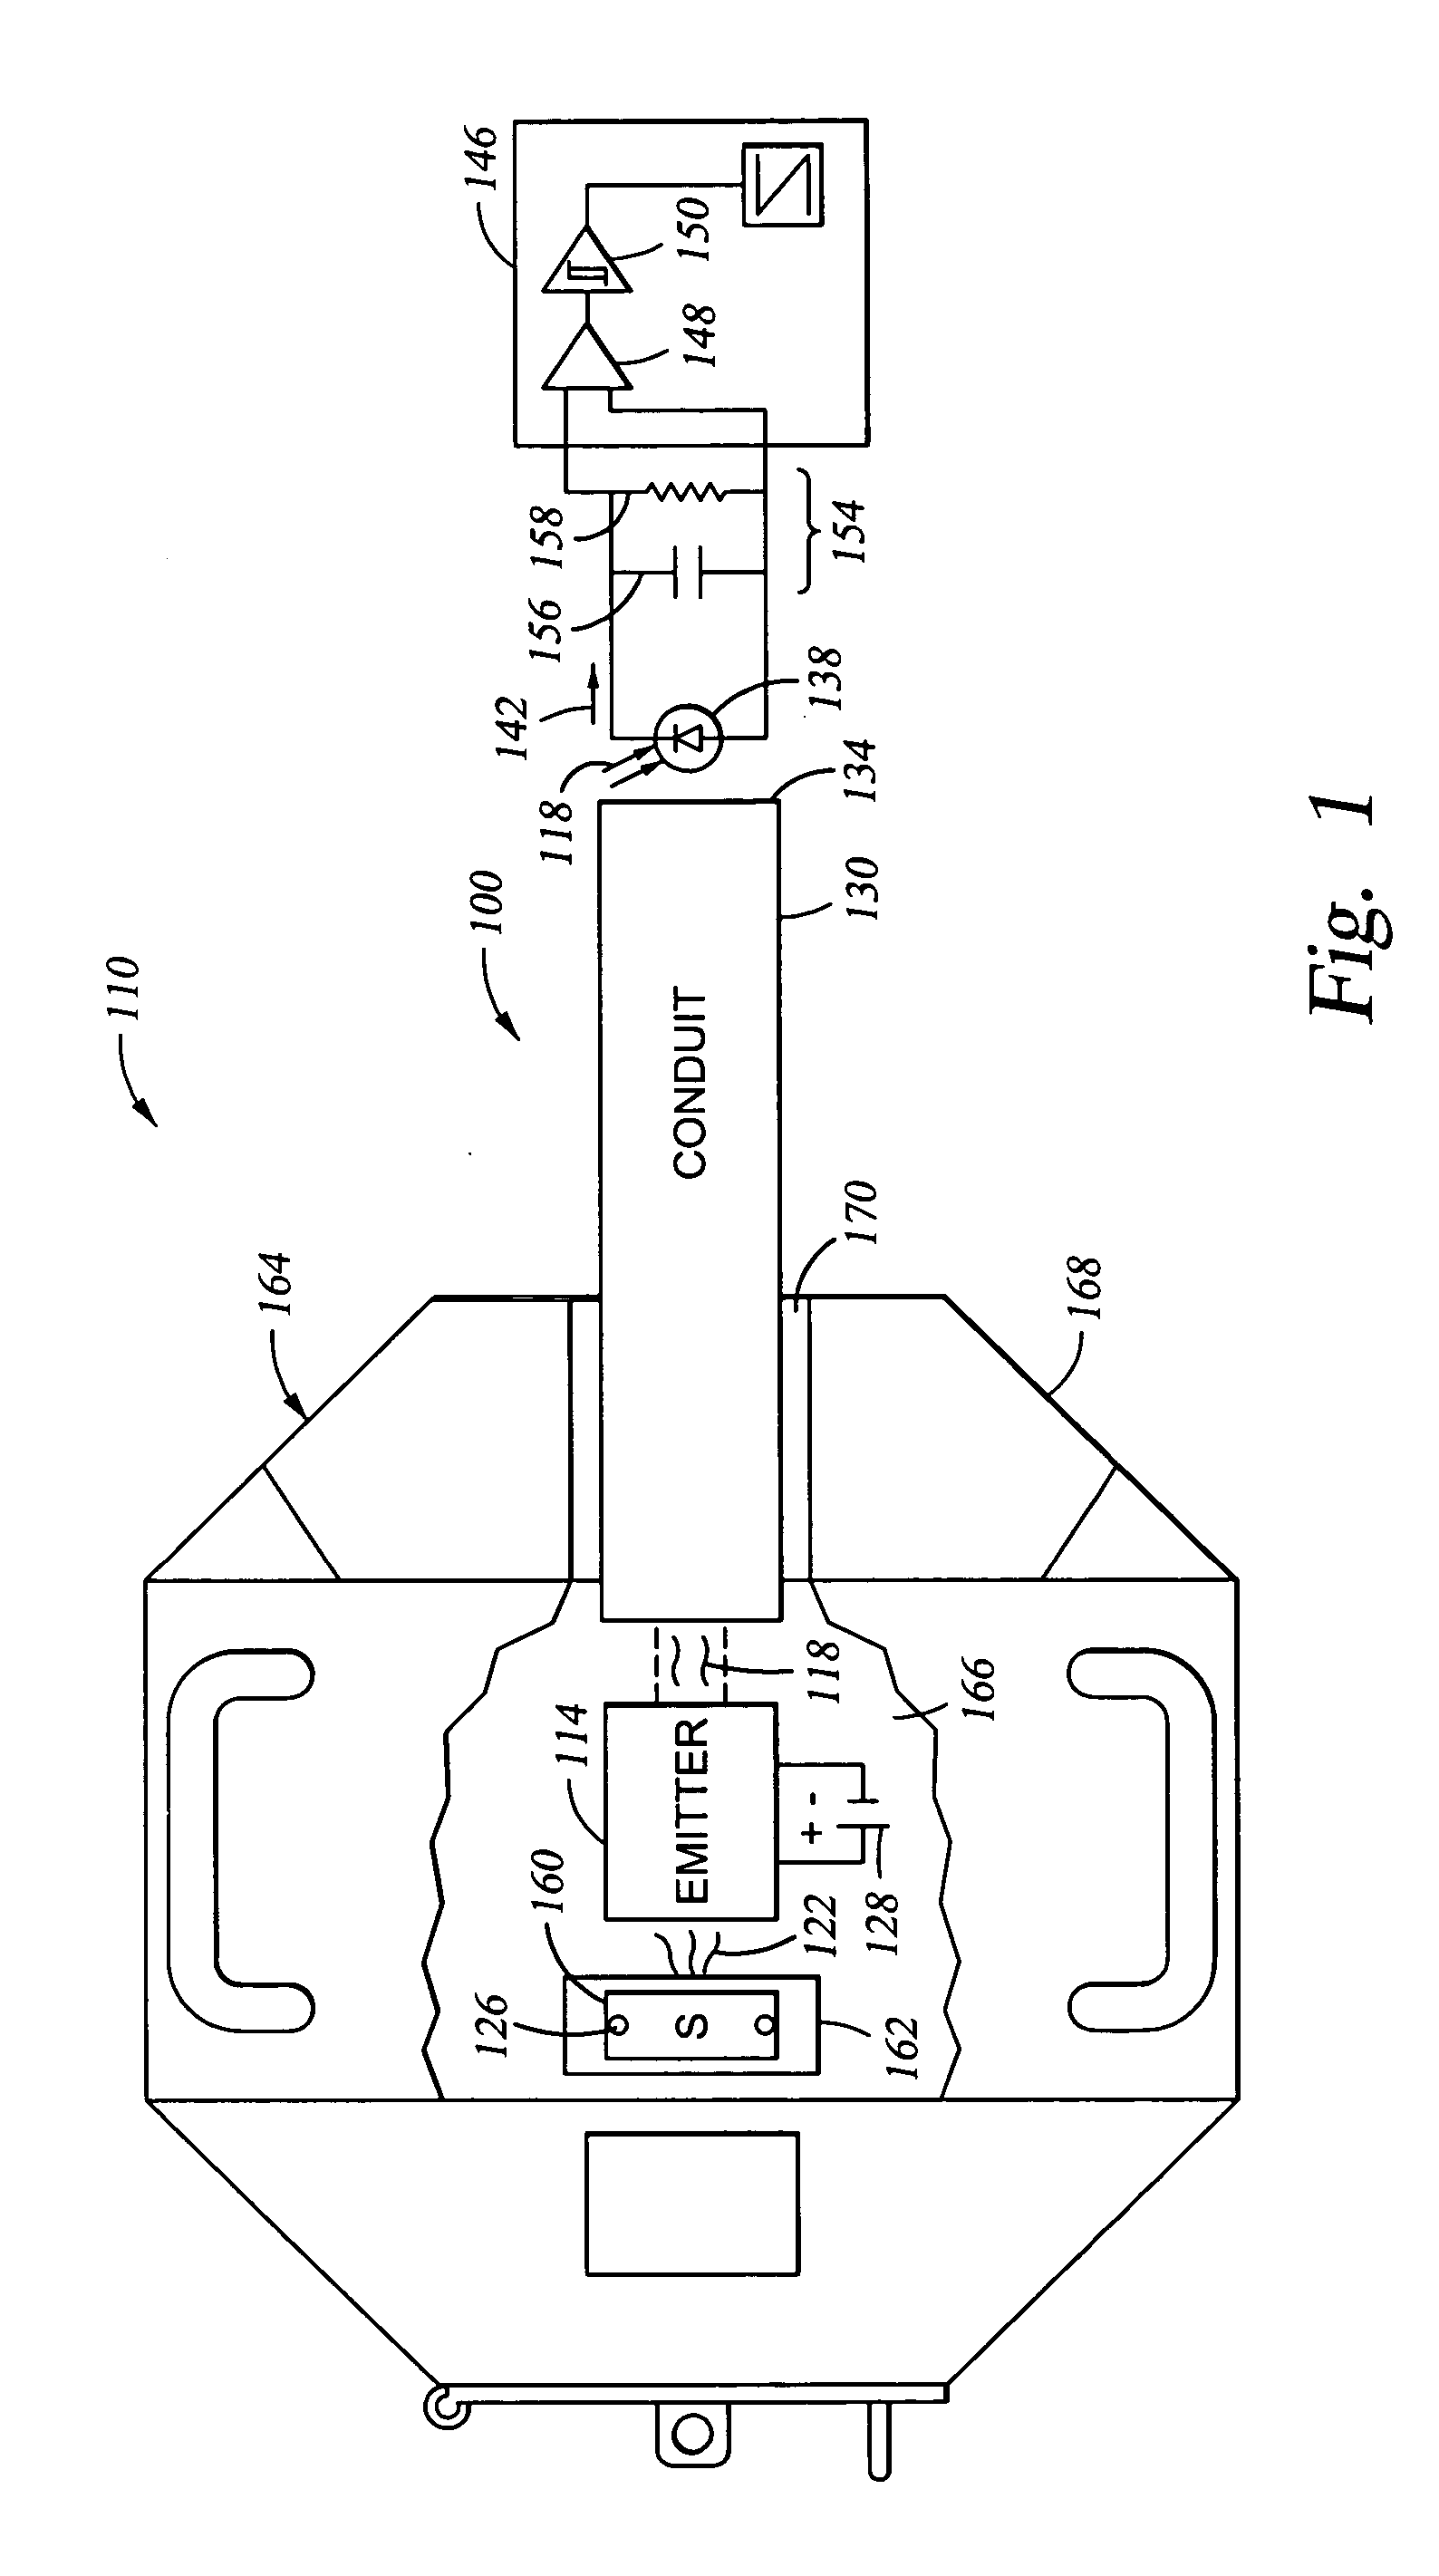 Radiation monitoring apparatus, systems, and methods